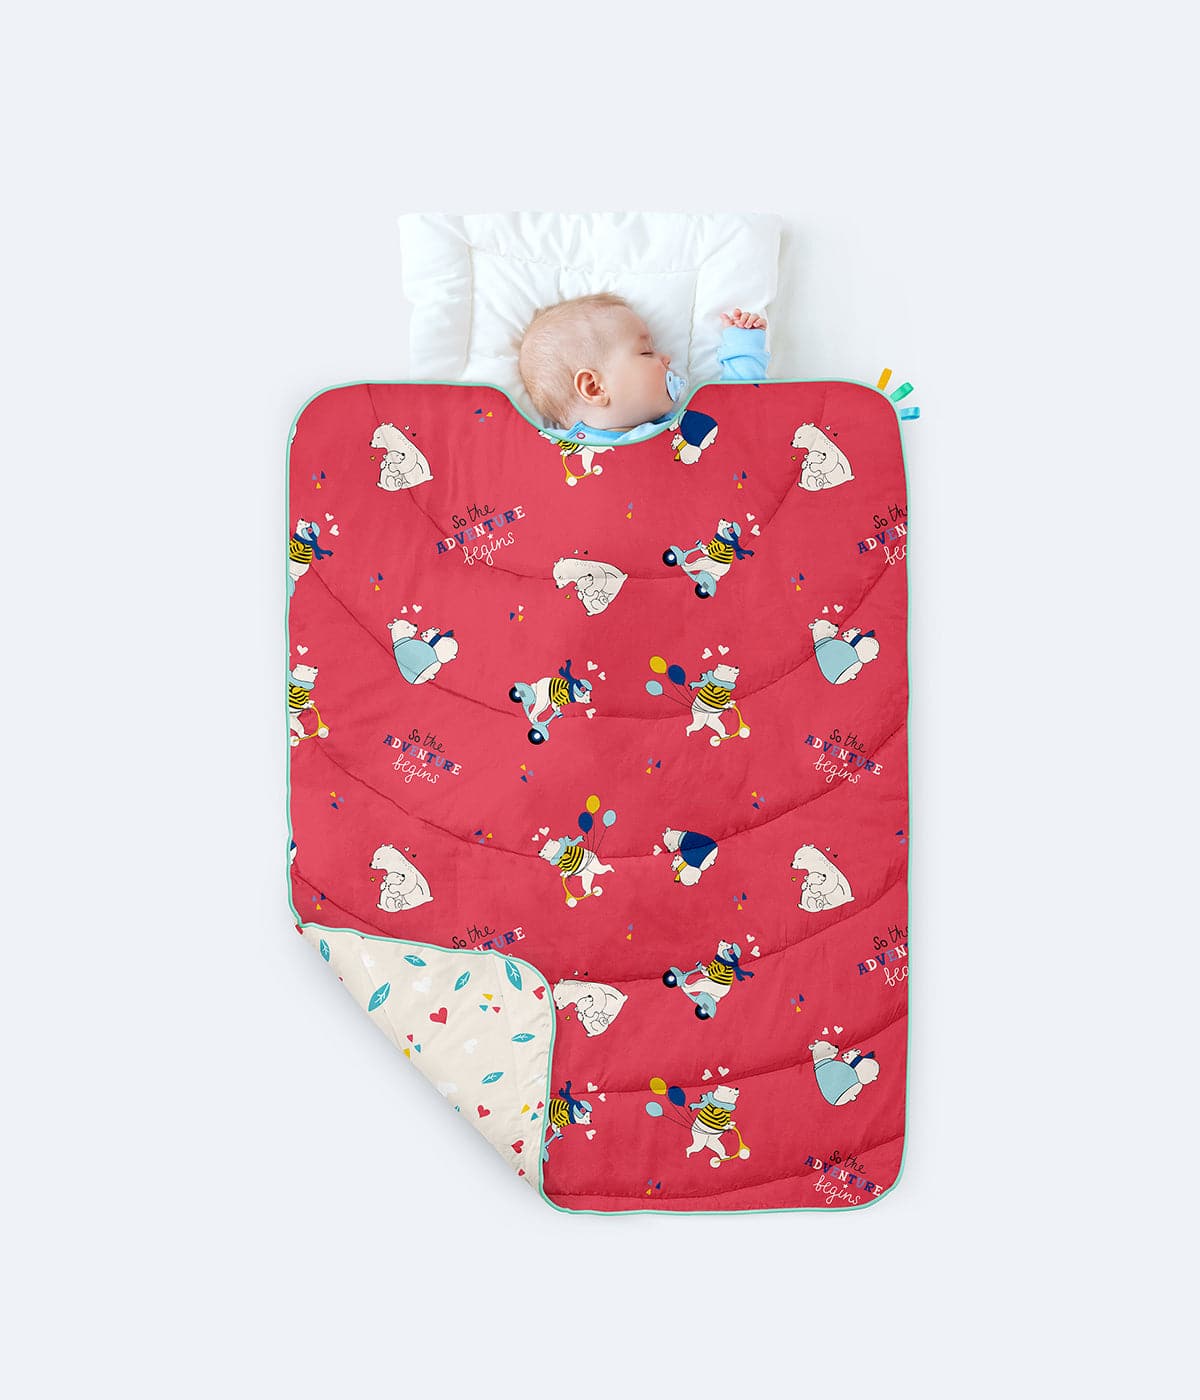 Baby's first festive gift set